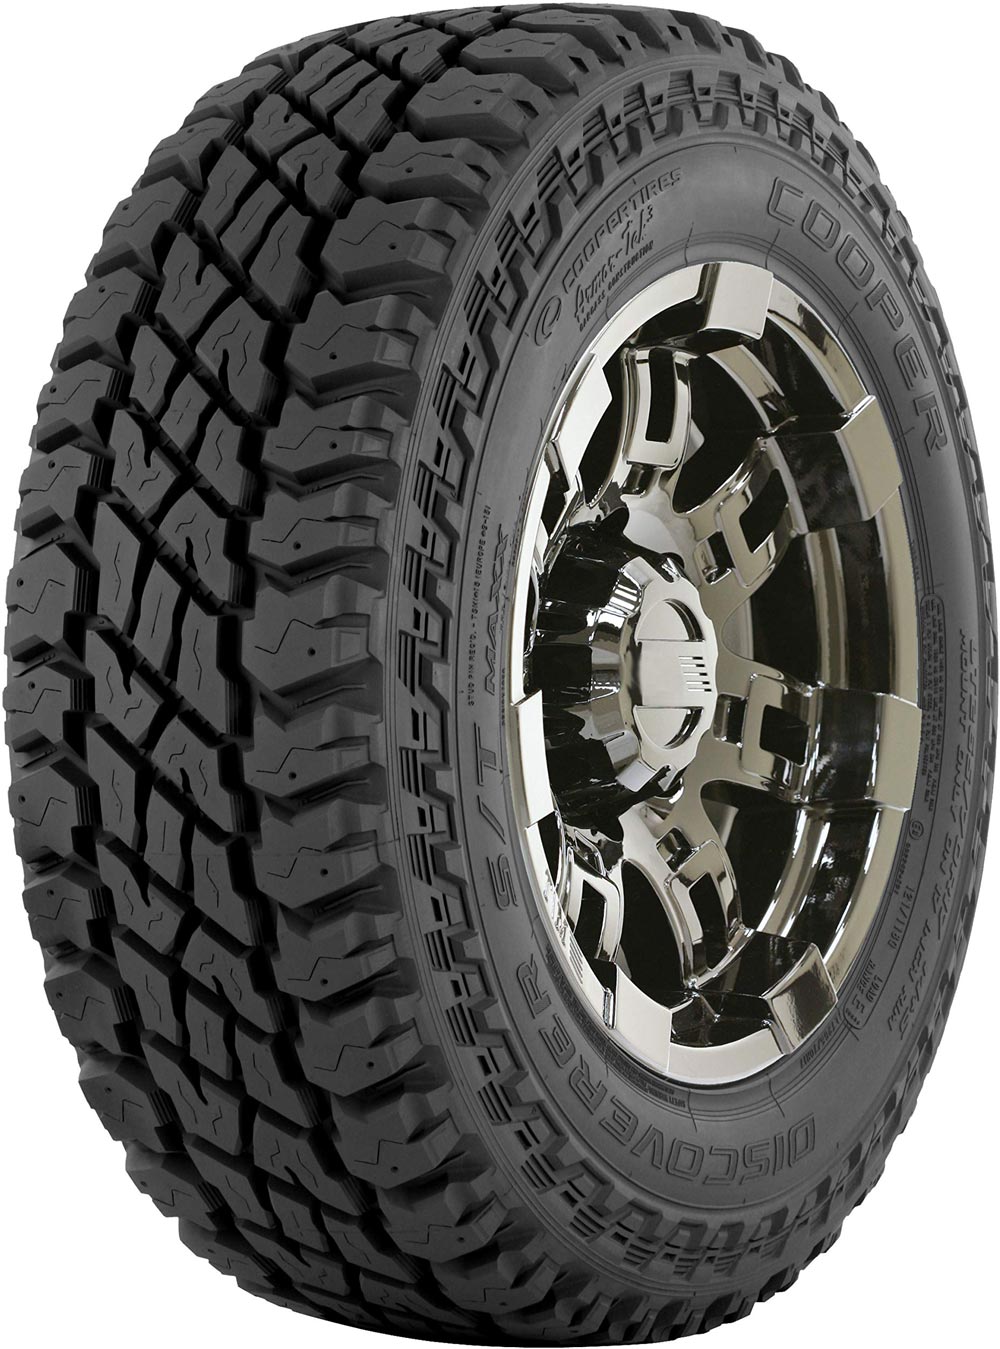 COOPER DISCOVERER ST MAXX P O BSW 225/75 R16 115Q